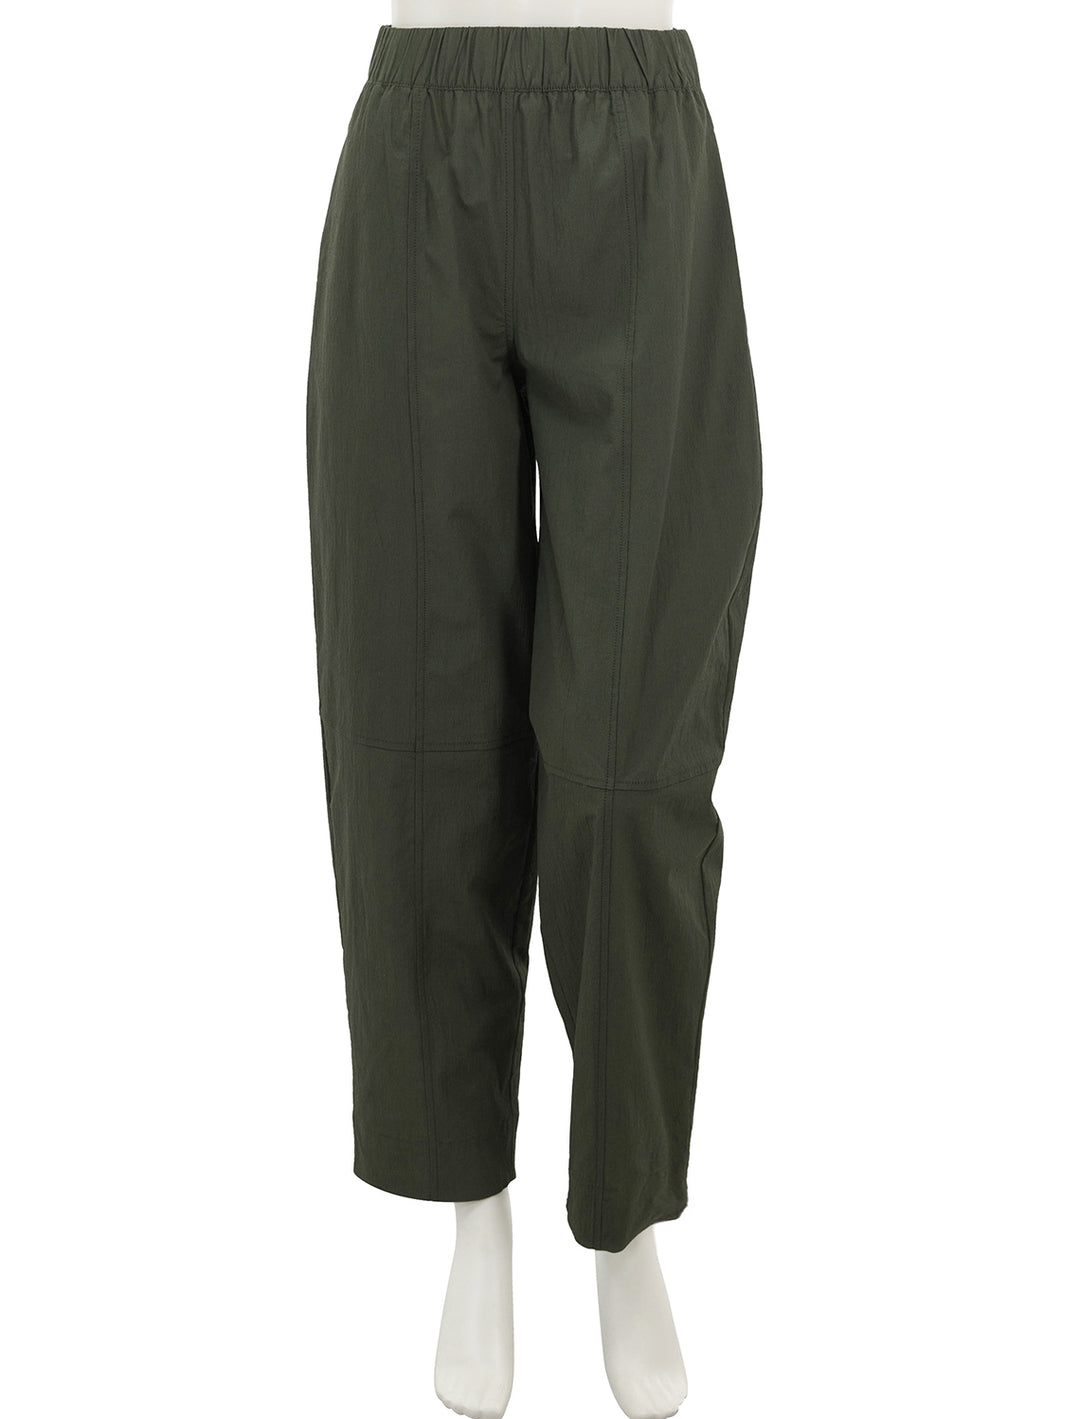 Front view of GANNI's curve pant in kombu green.